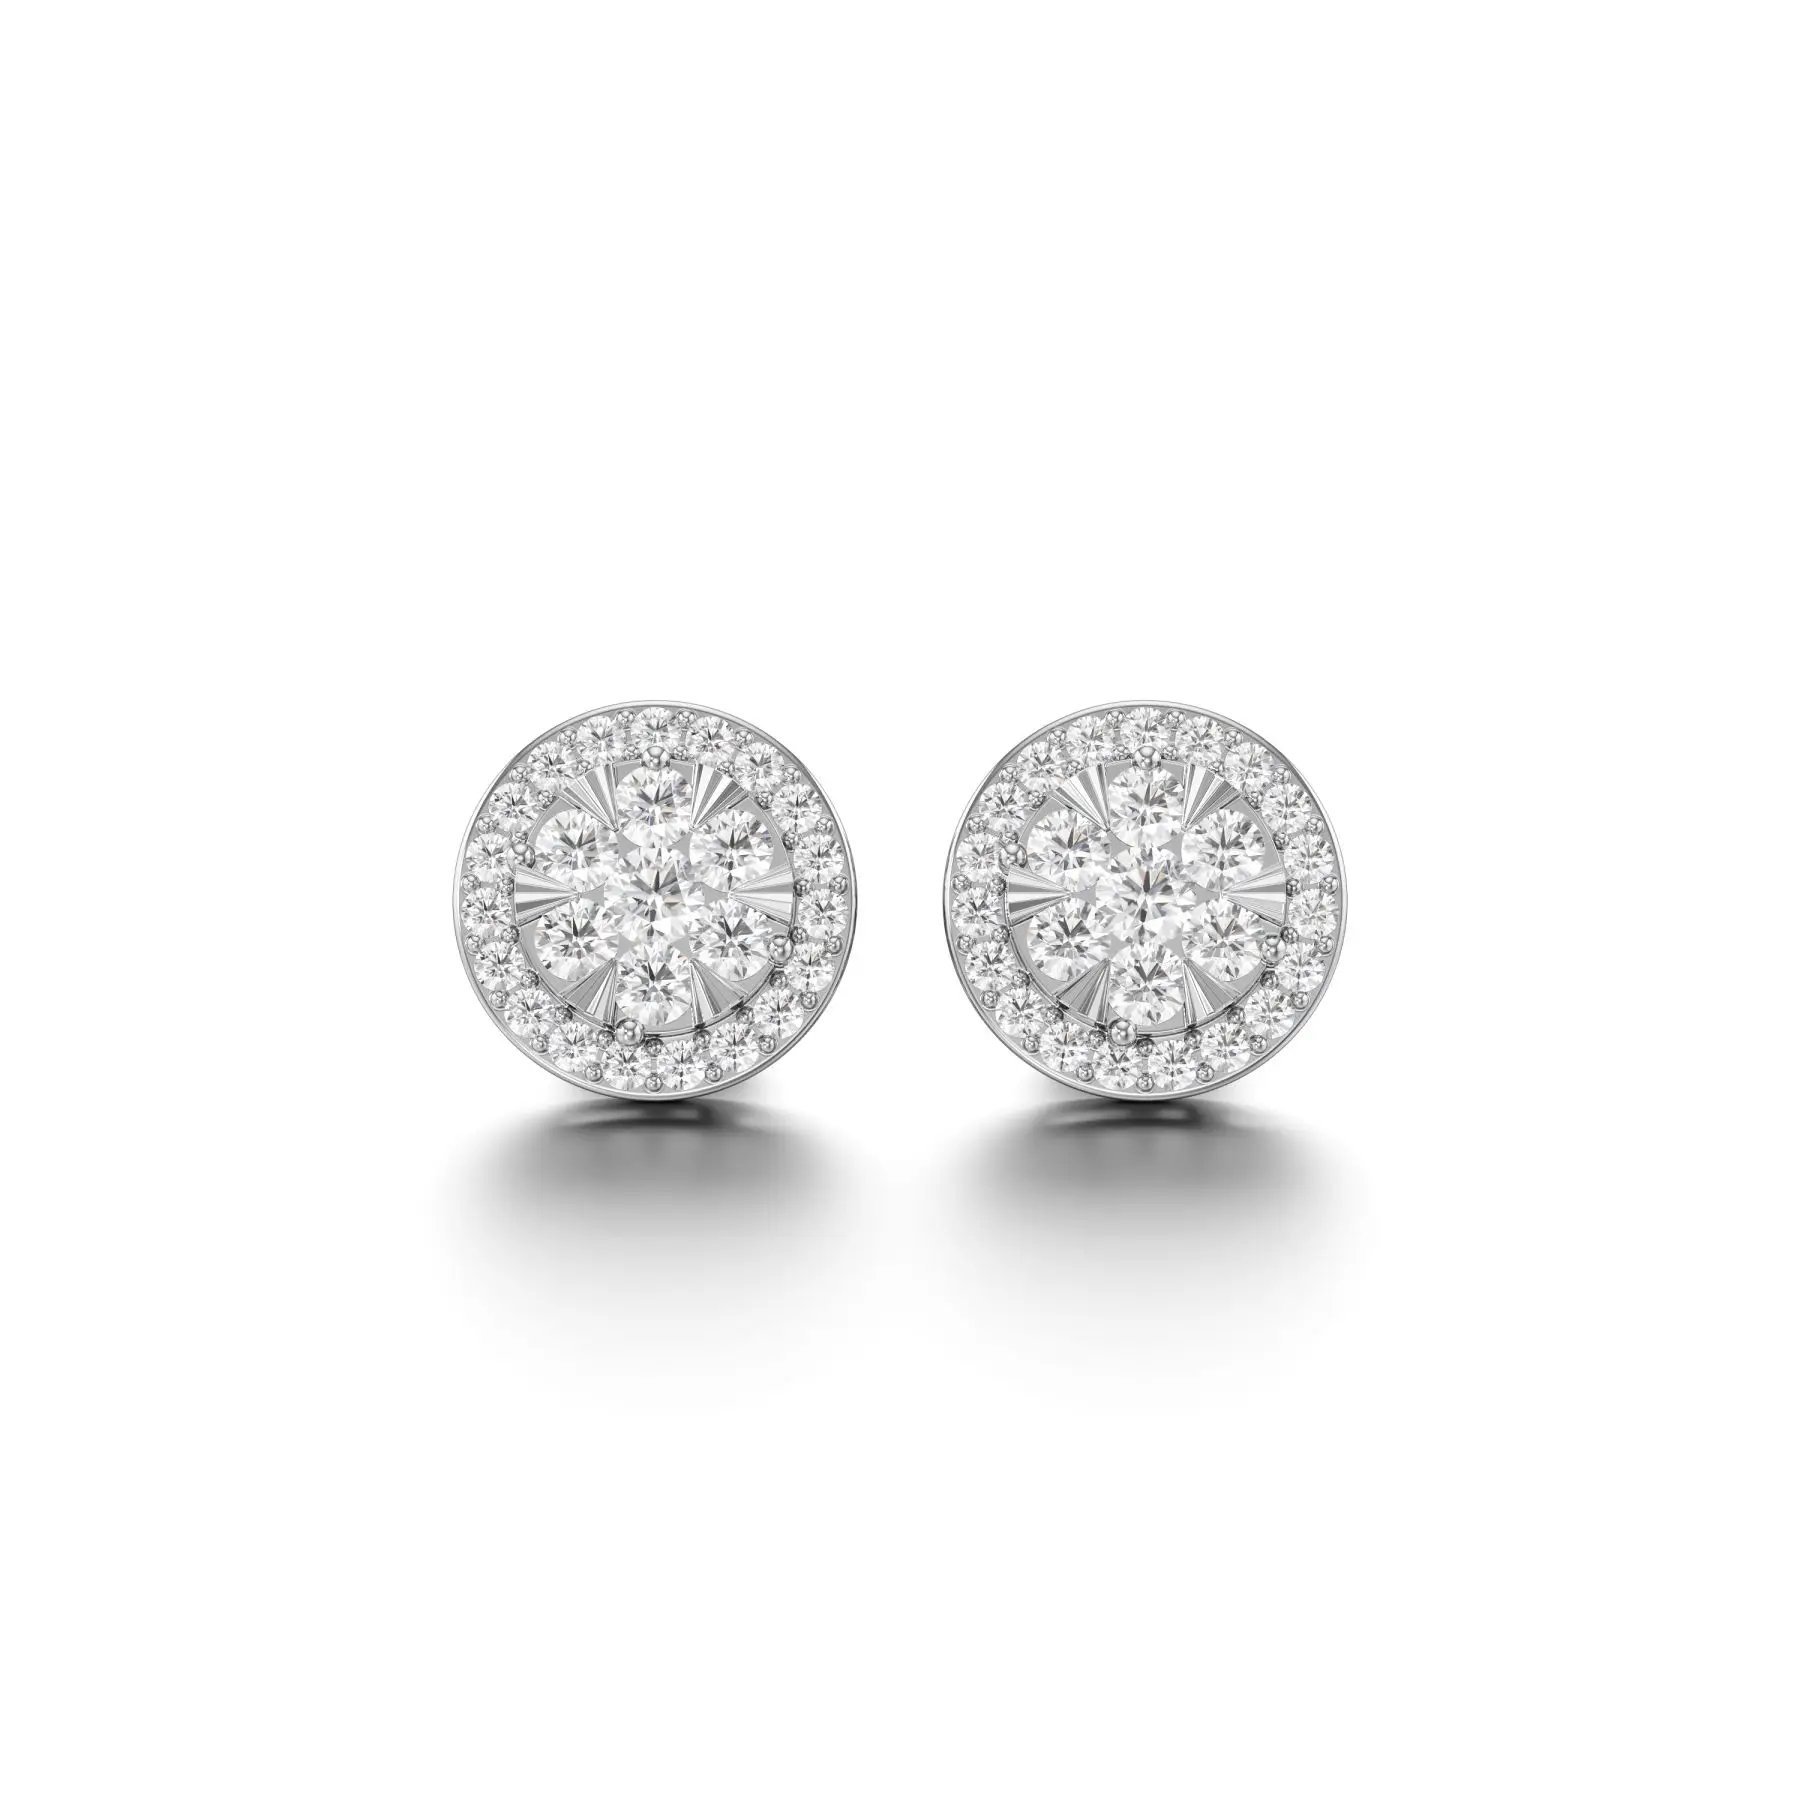 Round Rizzy Diamond Earrings in White 14k Gold